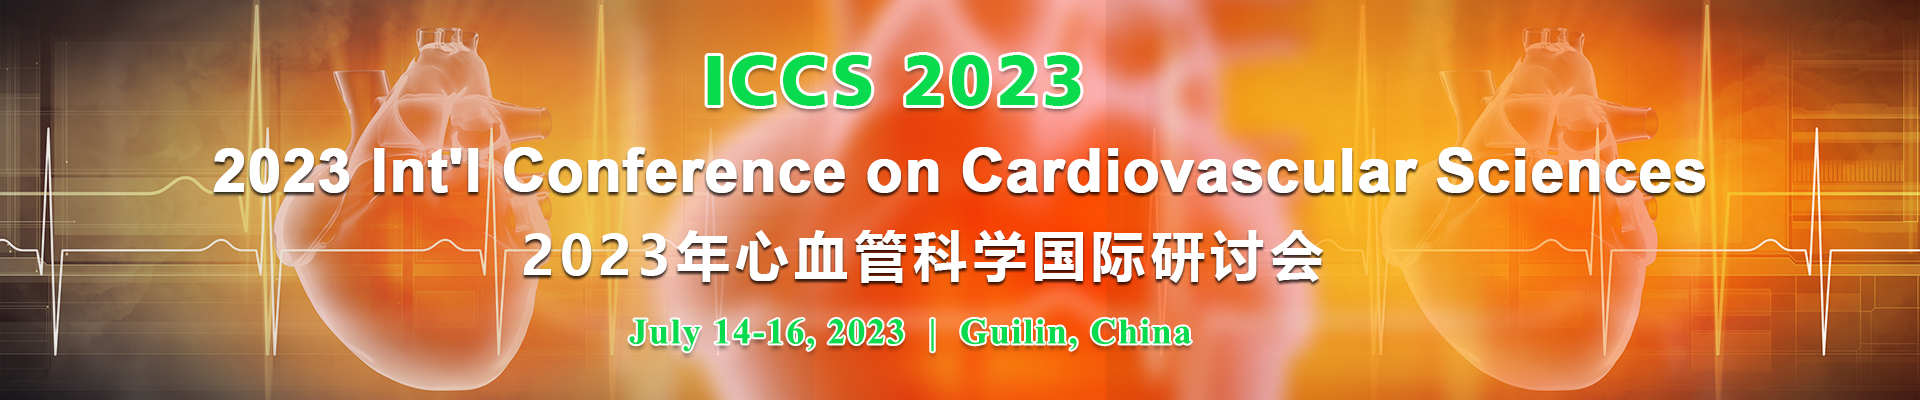 2023 Int'l Conference on Cardiovascular Sciences (ICCS 2023)